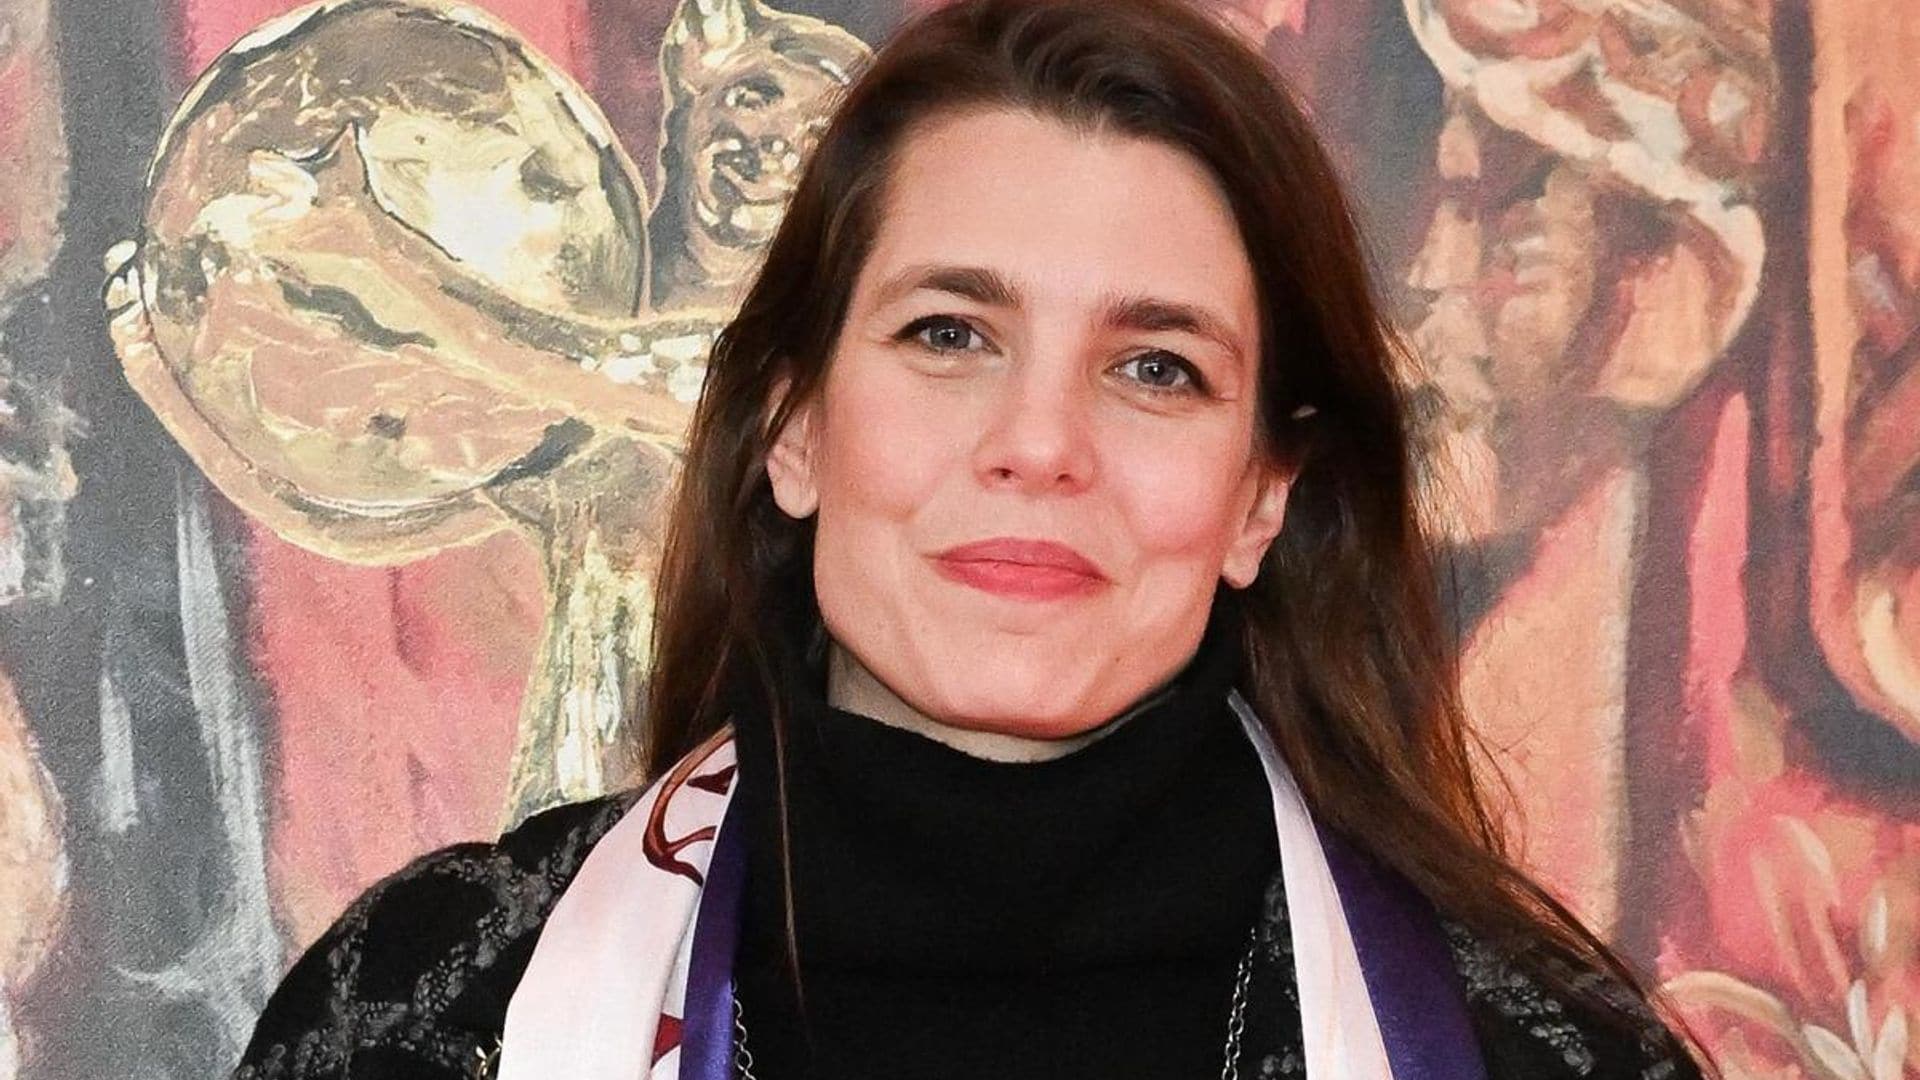 Charlotte Casiraghi makes appearance following pregnancy reports